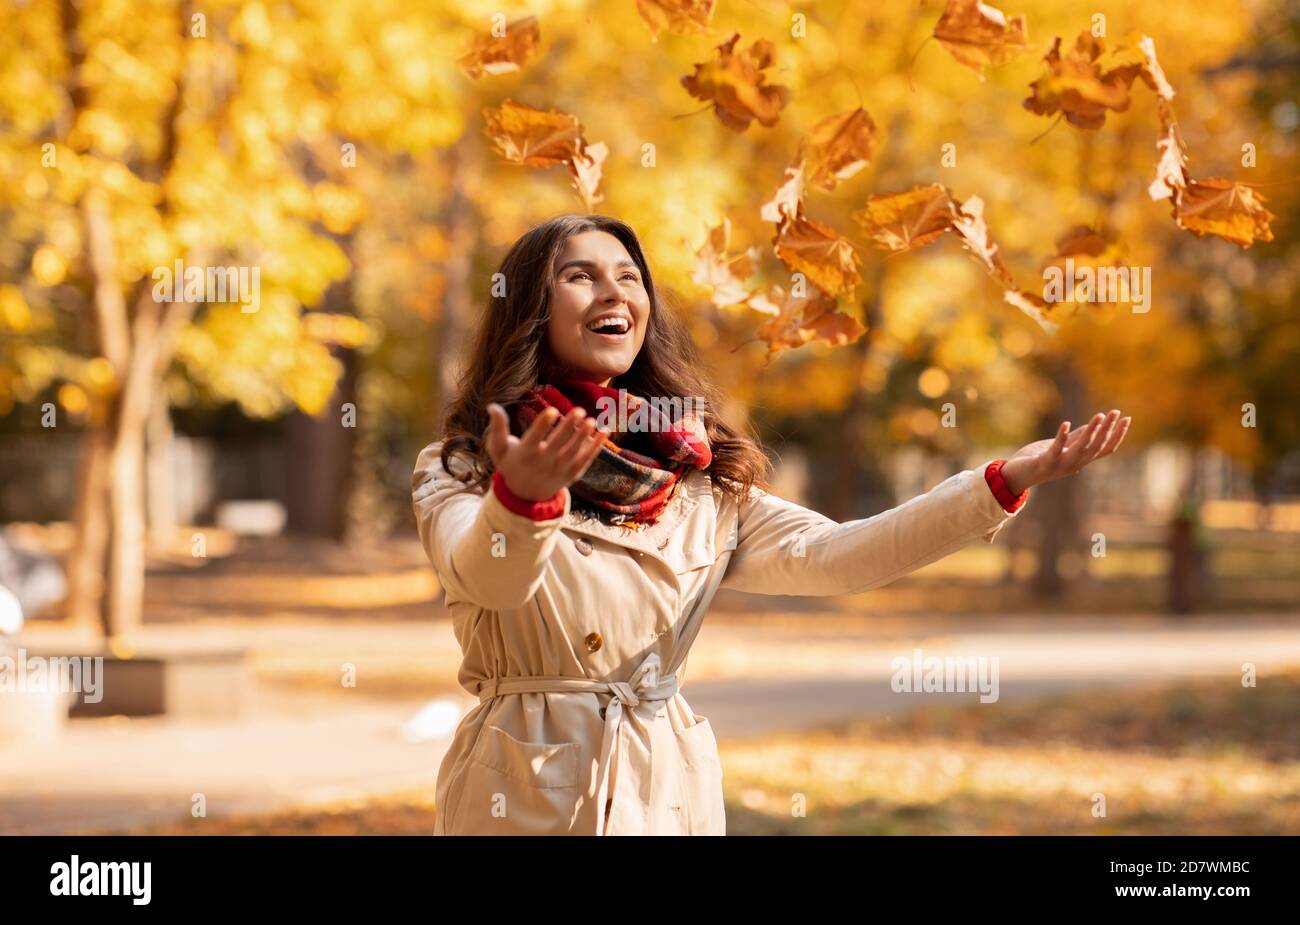 Joyful young woman in autumn outfit catching yellow leaves during her walk at park on bright fall day Stock Photo